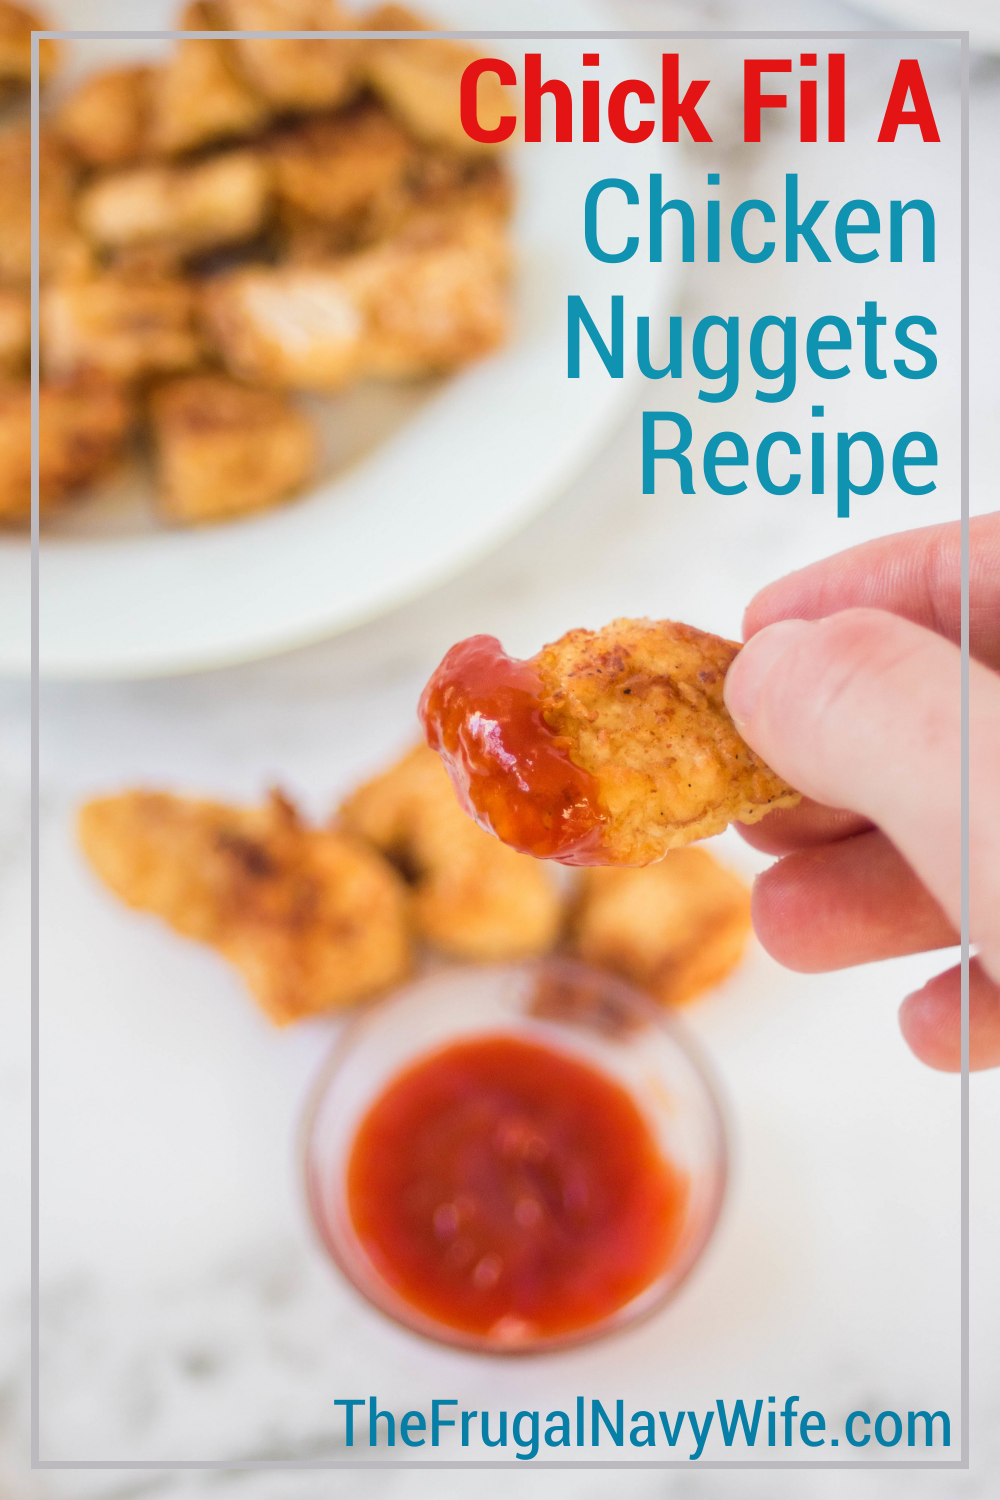 Copycat Chick-fil-A Nuggets Recipe - How To Make Chick-Fil-A Nuggets